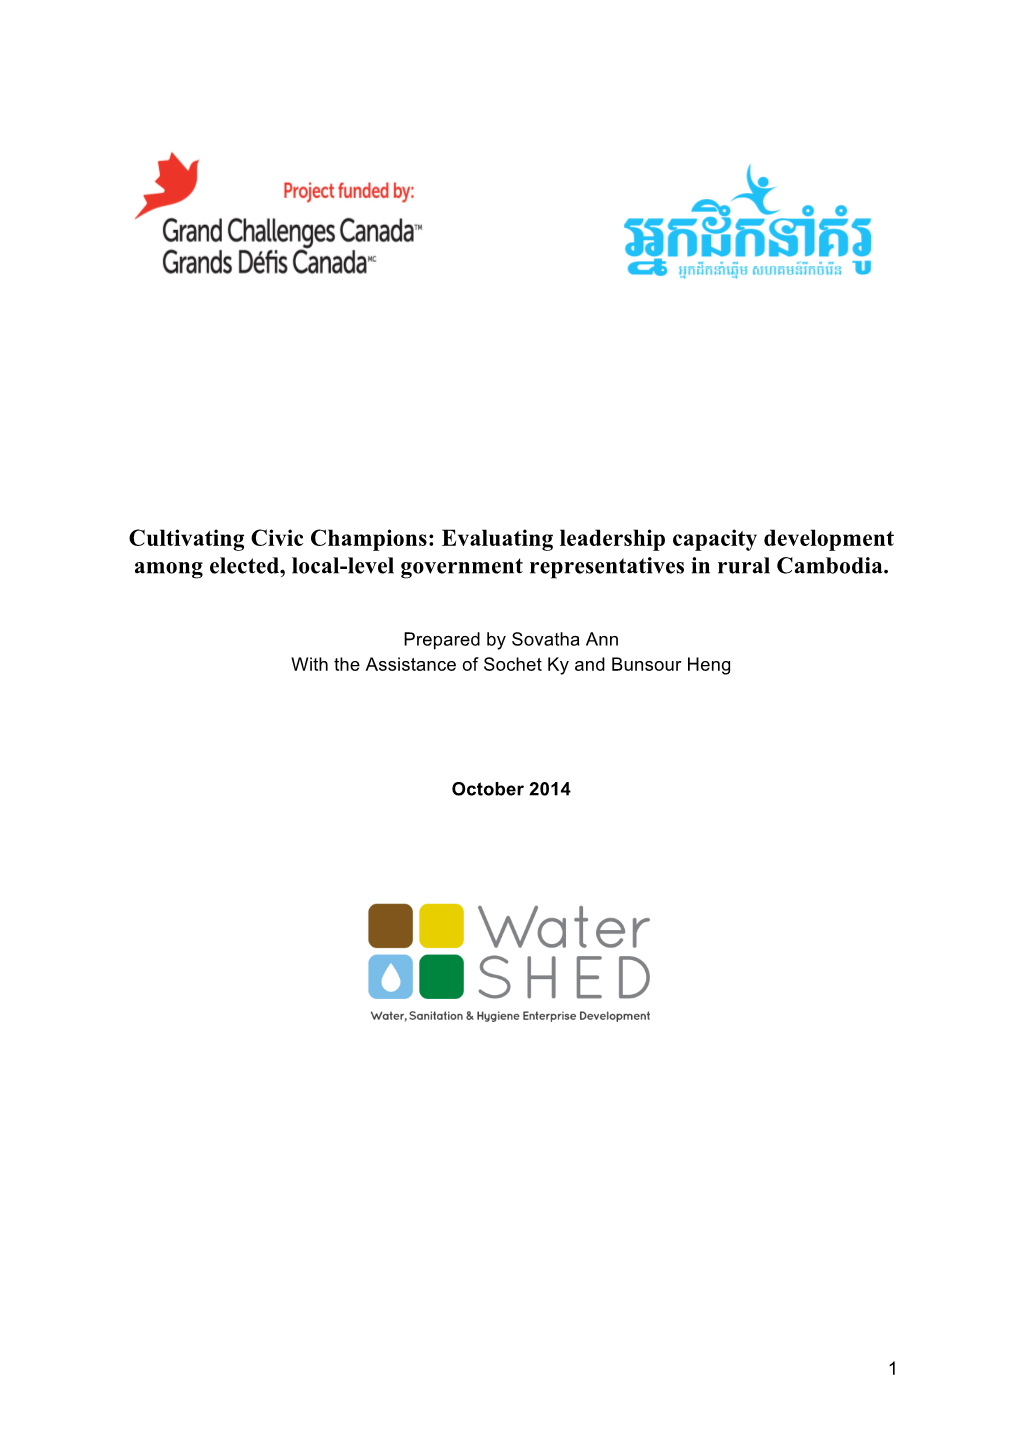 Cultivating Civic Champions: Evaluating Leadership Capacity Development Among Elected, Local-Level Government Representatives in Rural Cambodia